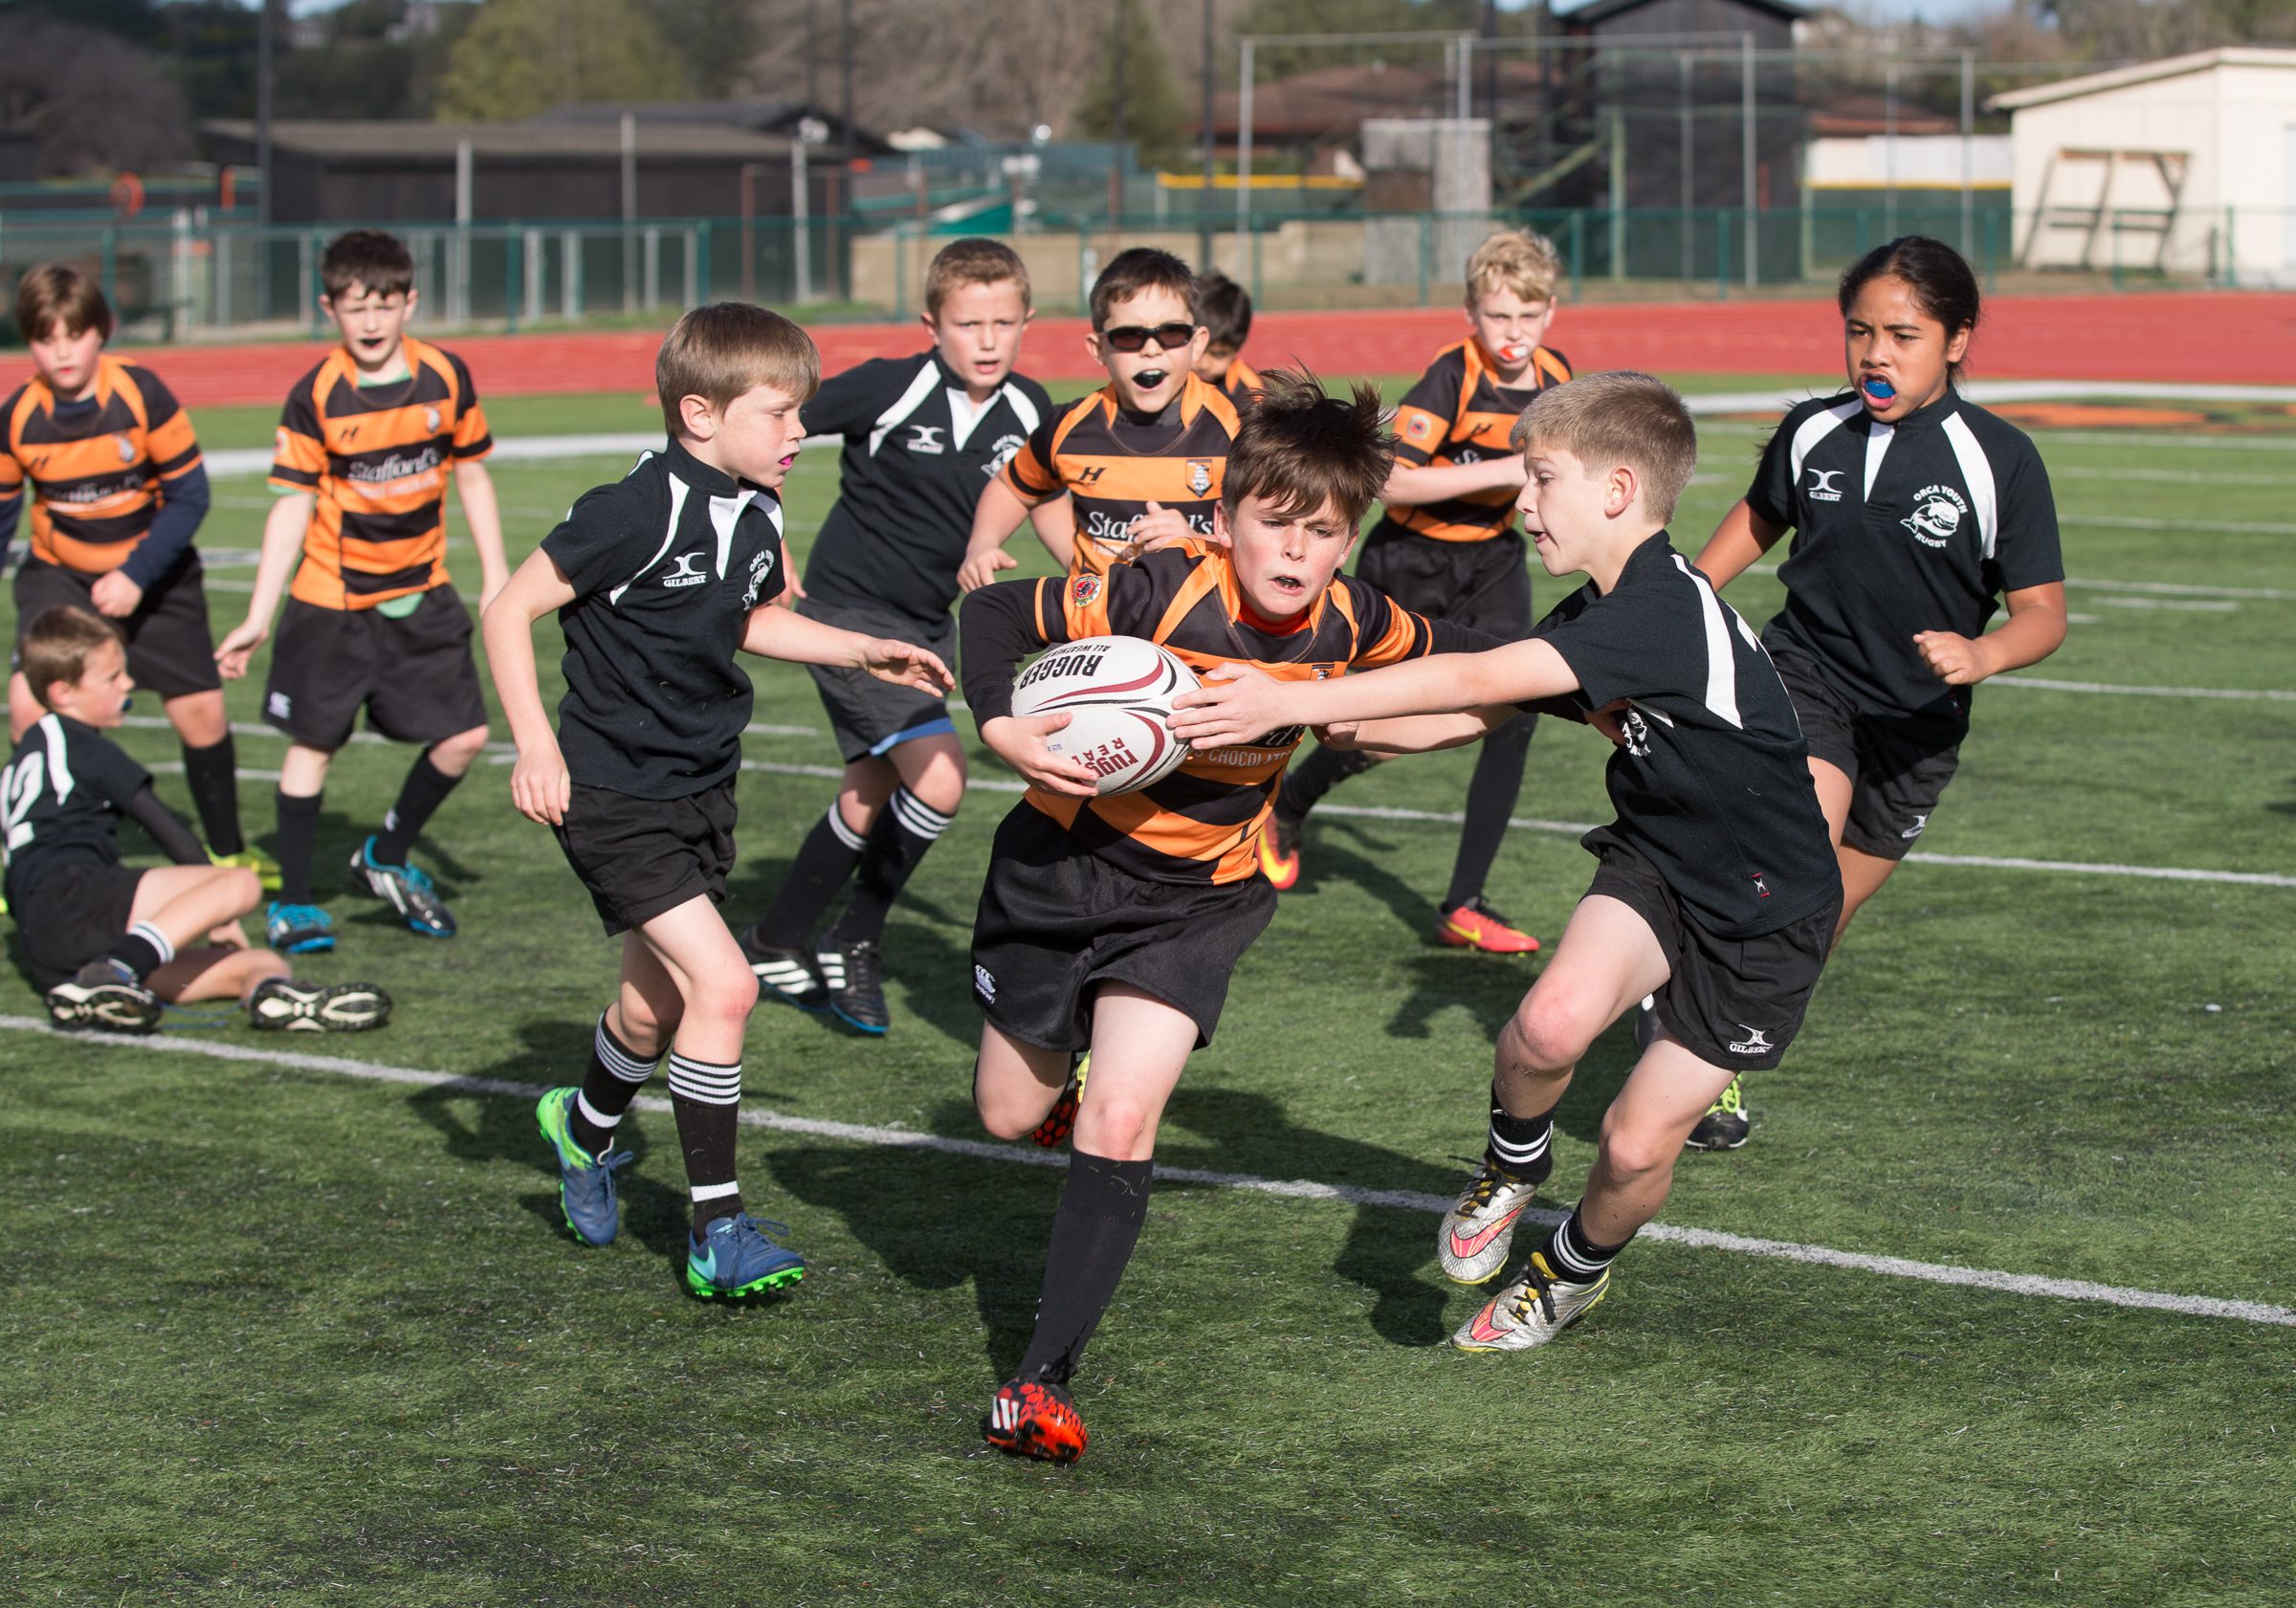 Local youth rugby club seeks more players, coaches